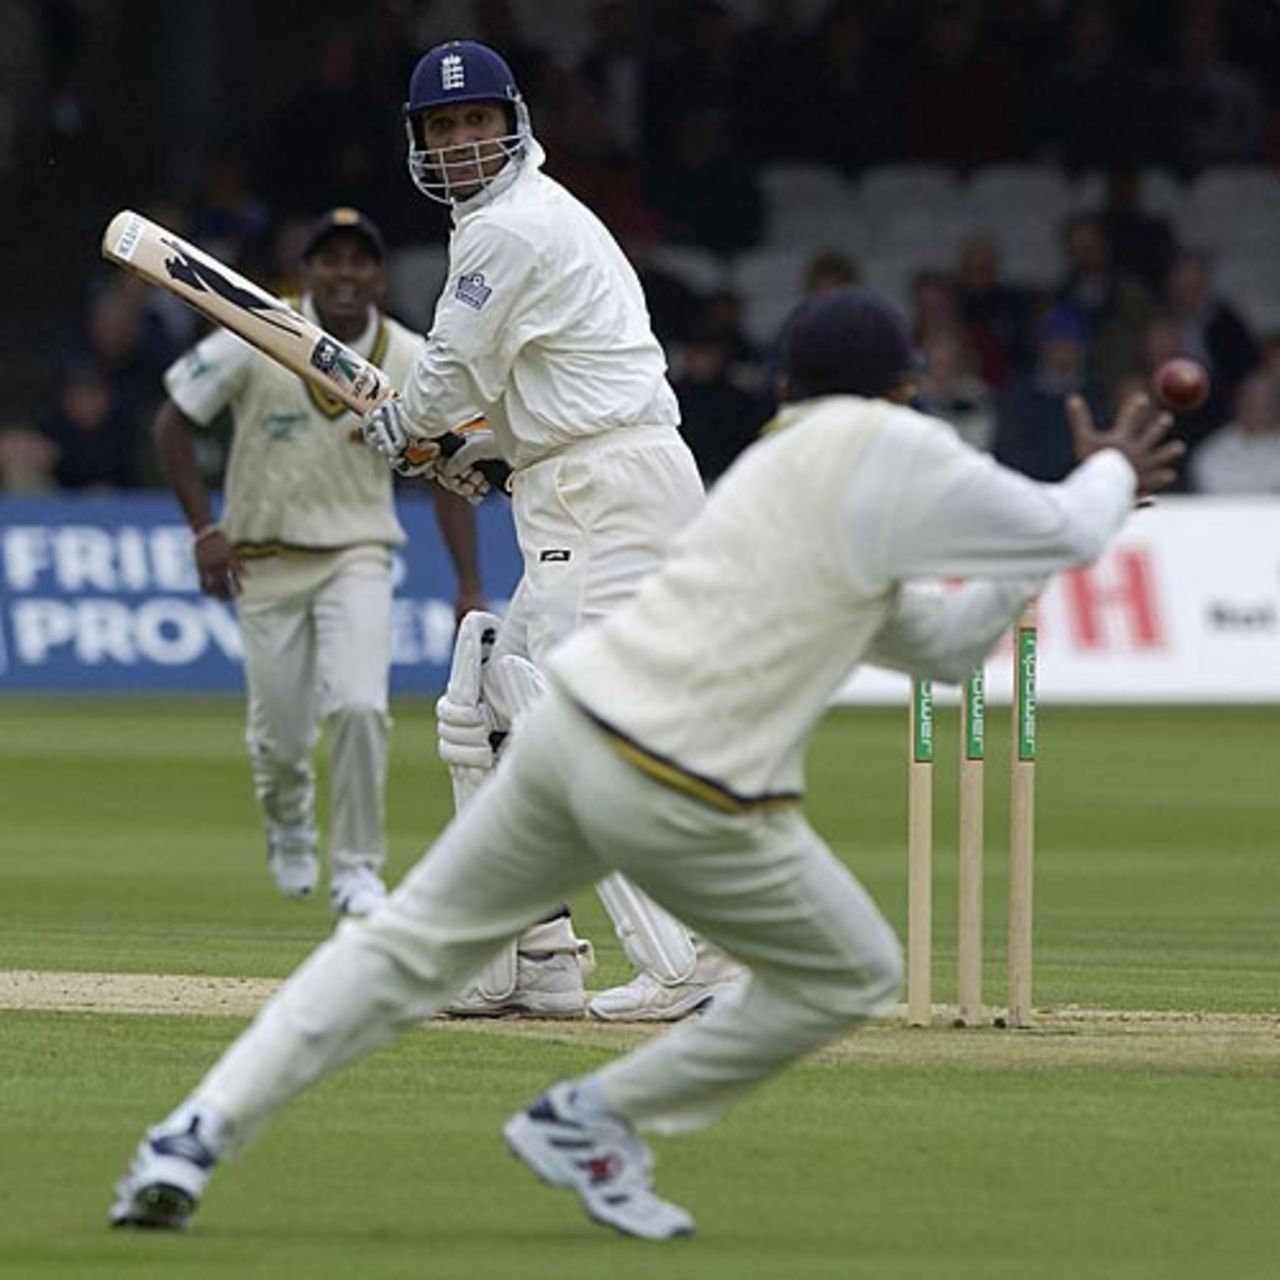 Mahela Jayawardene latches on to a catch from Mark Butcher, England v Sri Lanka, 1st Test, Lord's, 3rd day, May 18, 2002